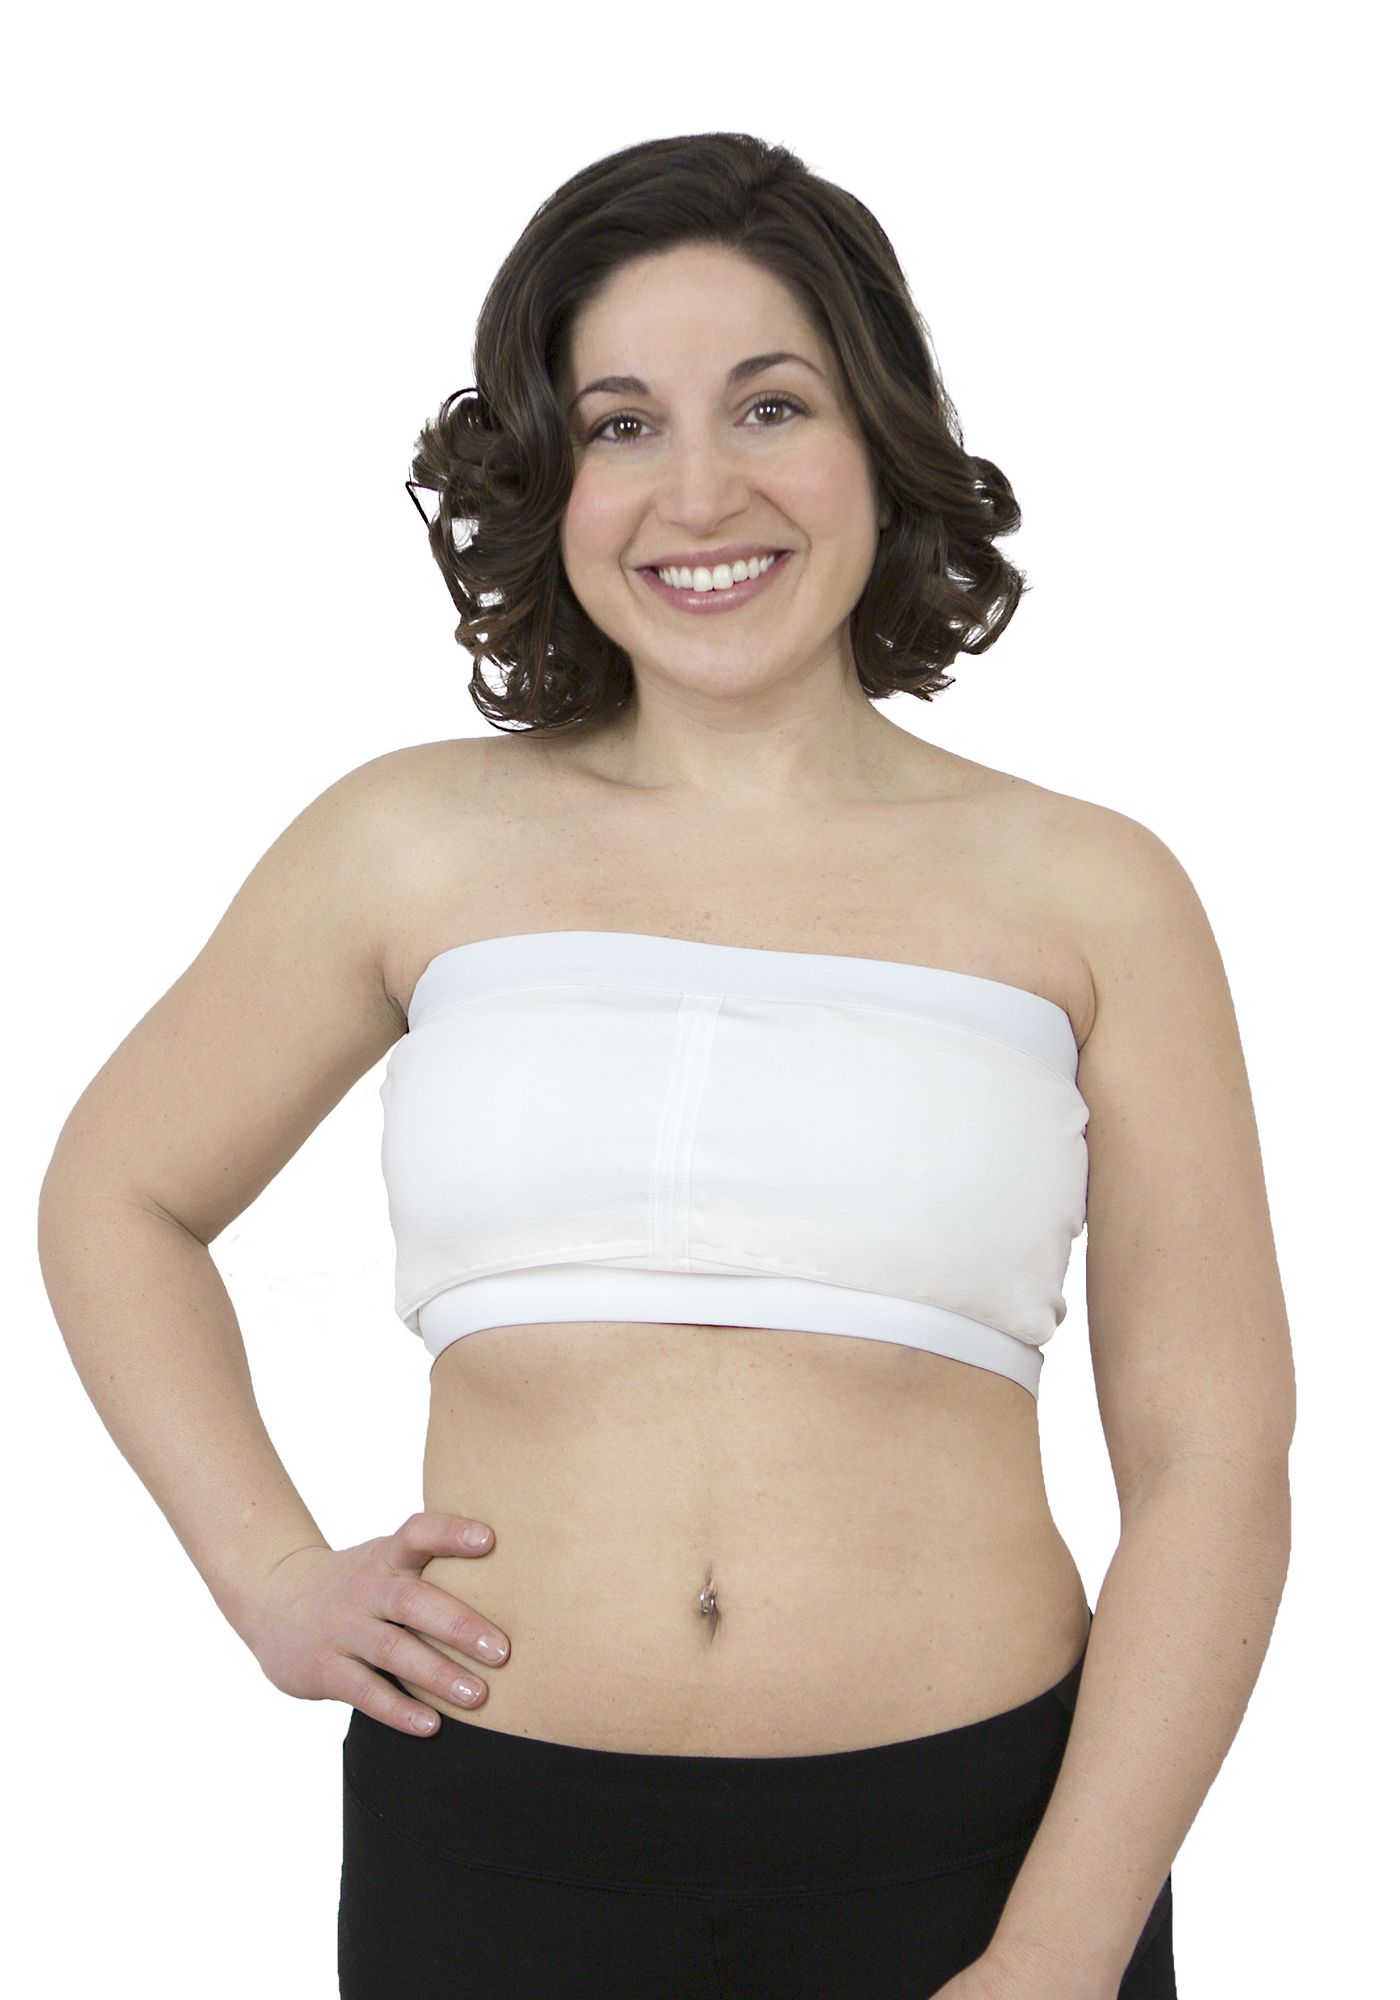 Rumina'S Pump&Nurse Relaxed All-In-One Nursing Bra For Maternity